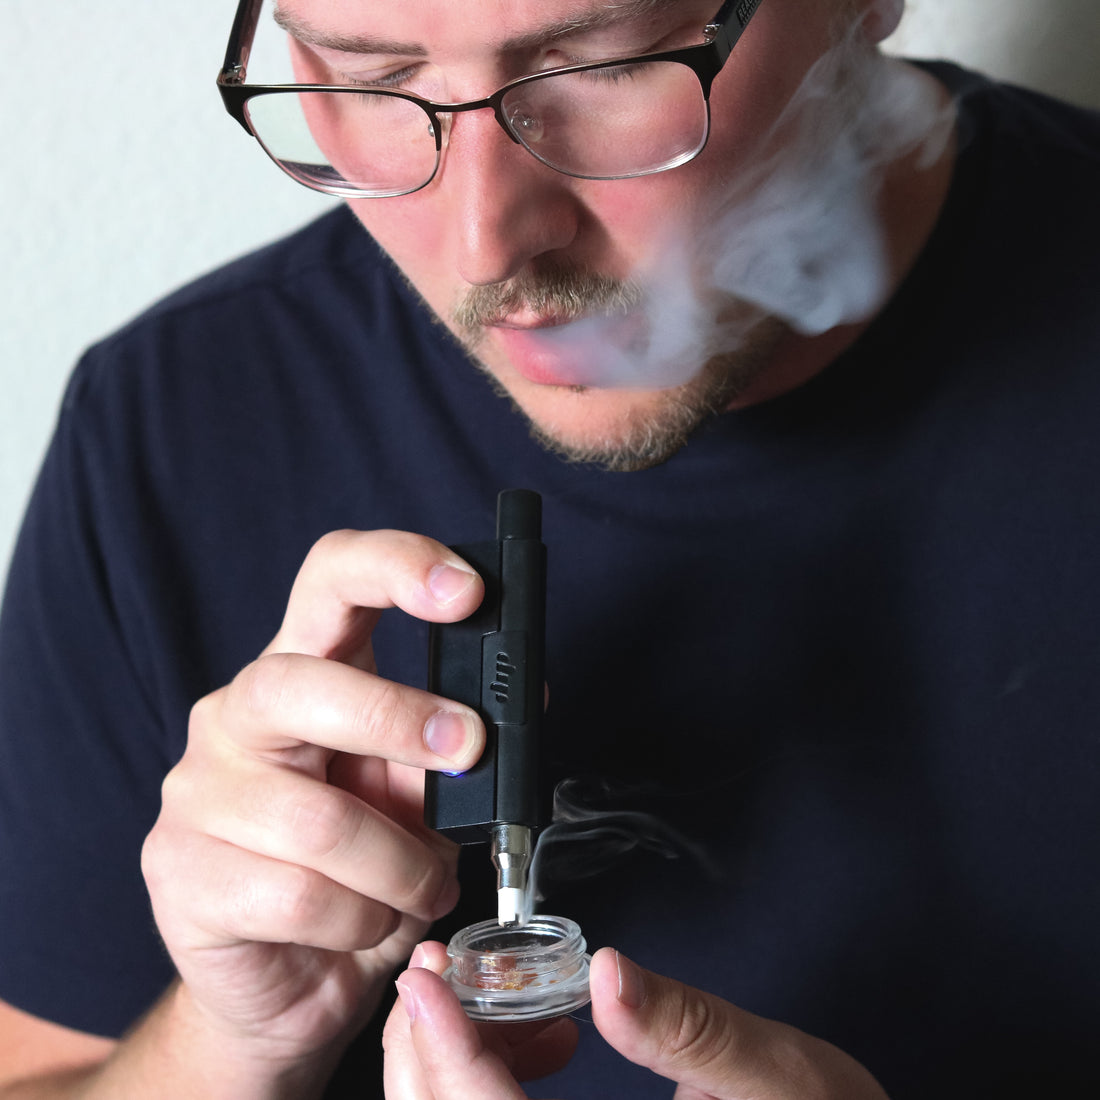 Dip Devices Guide to Cannabis Concentrates